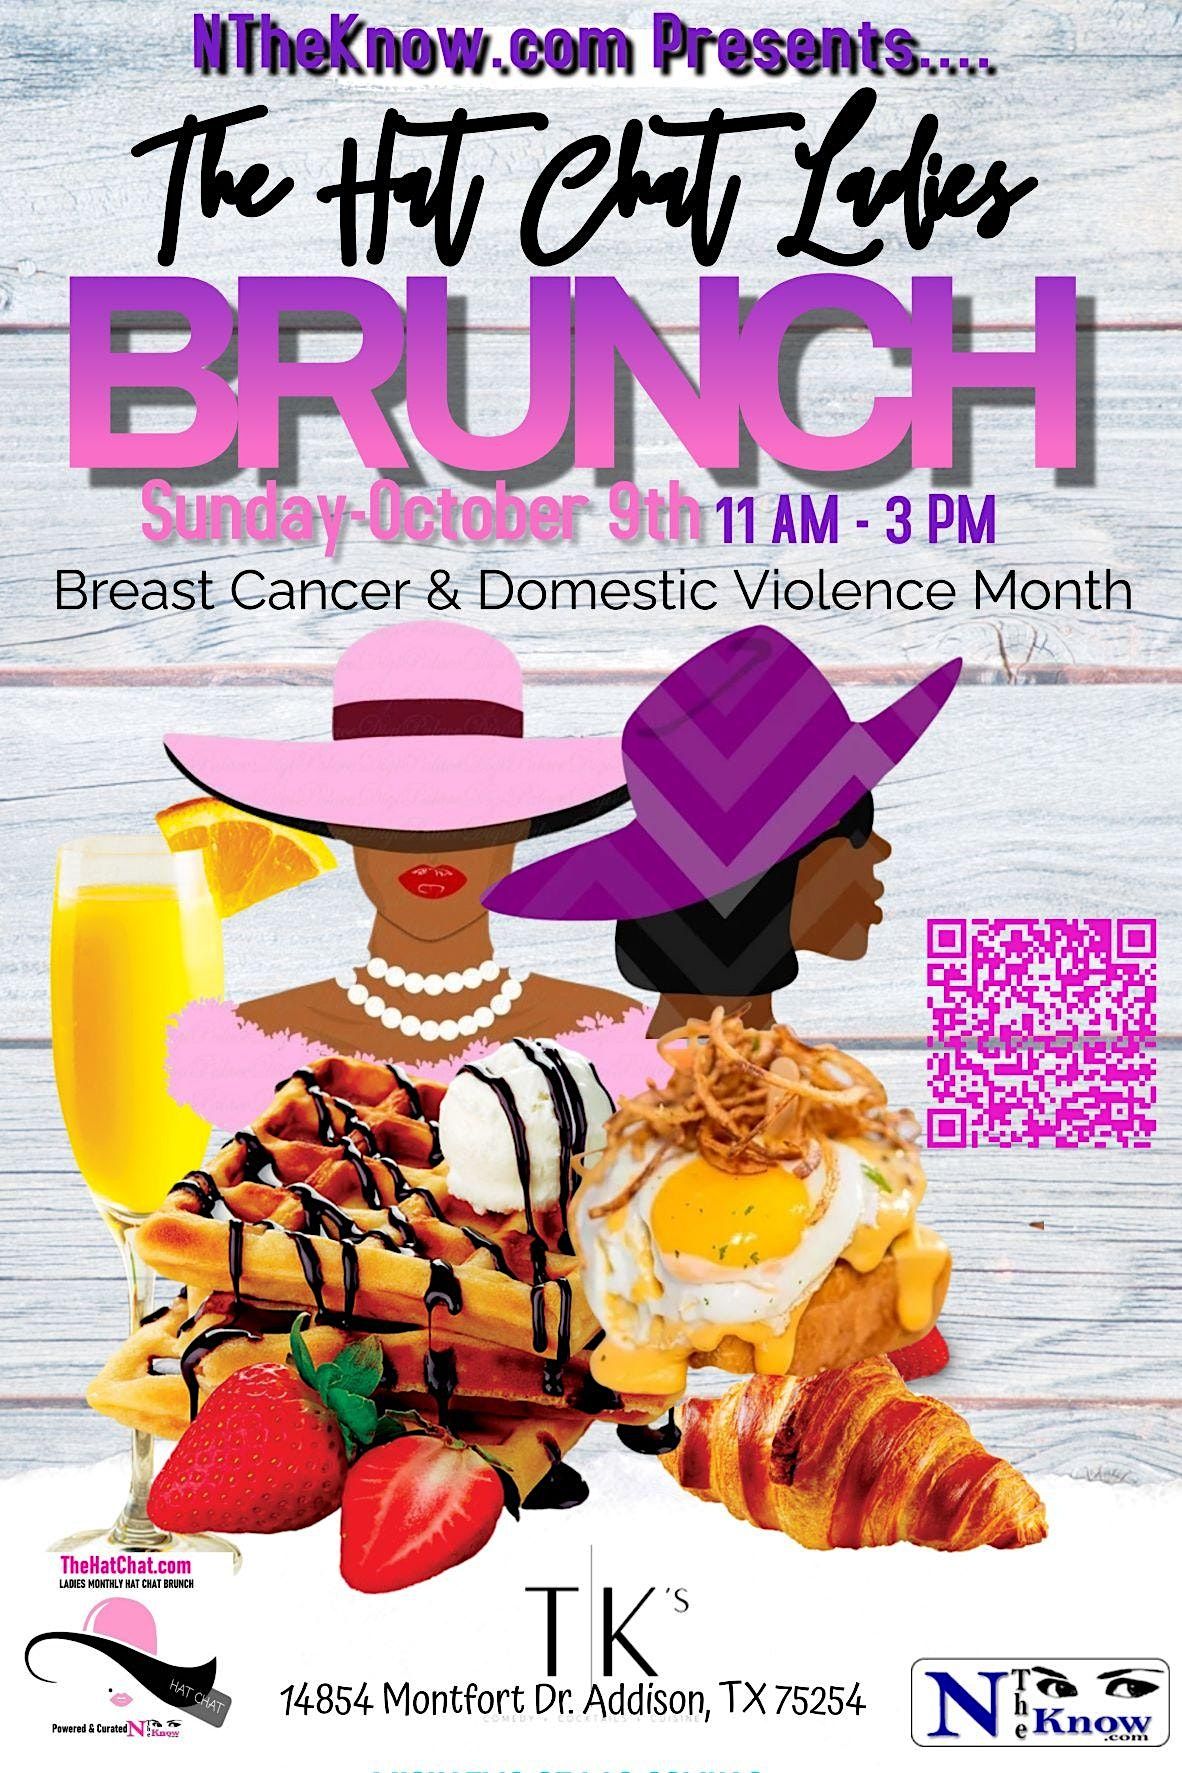 The Hat Chat Ladies Brunch Oct 9 @ TK's in Addison